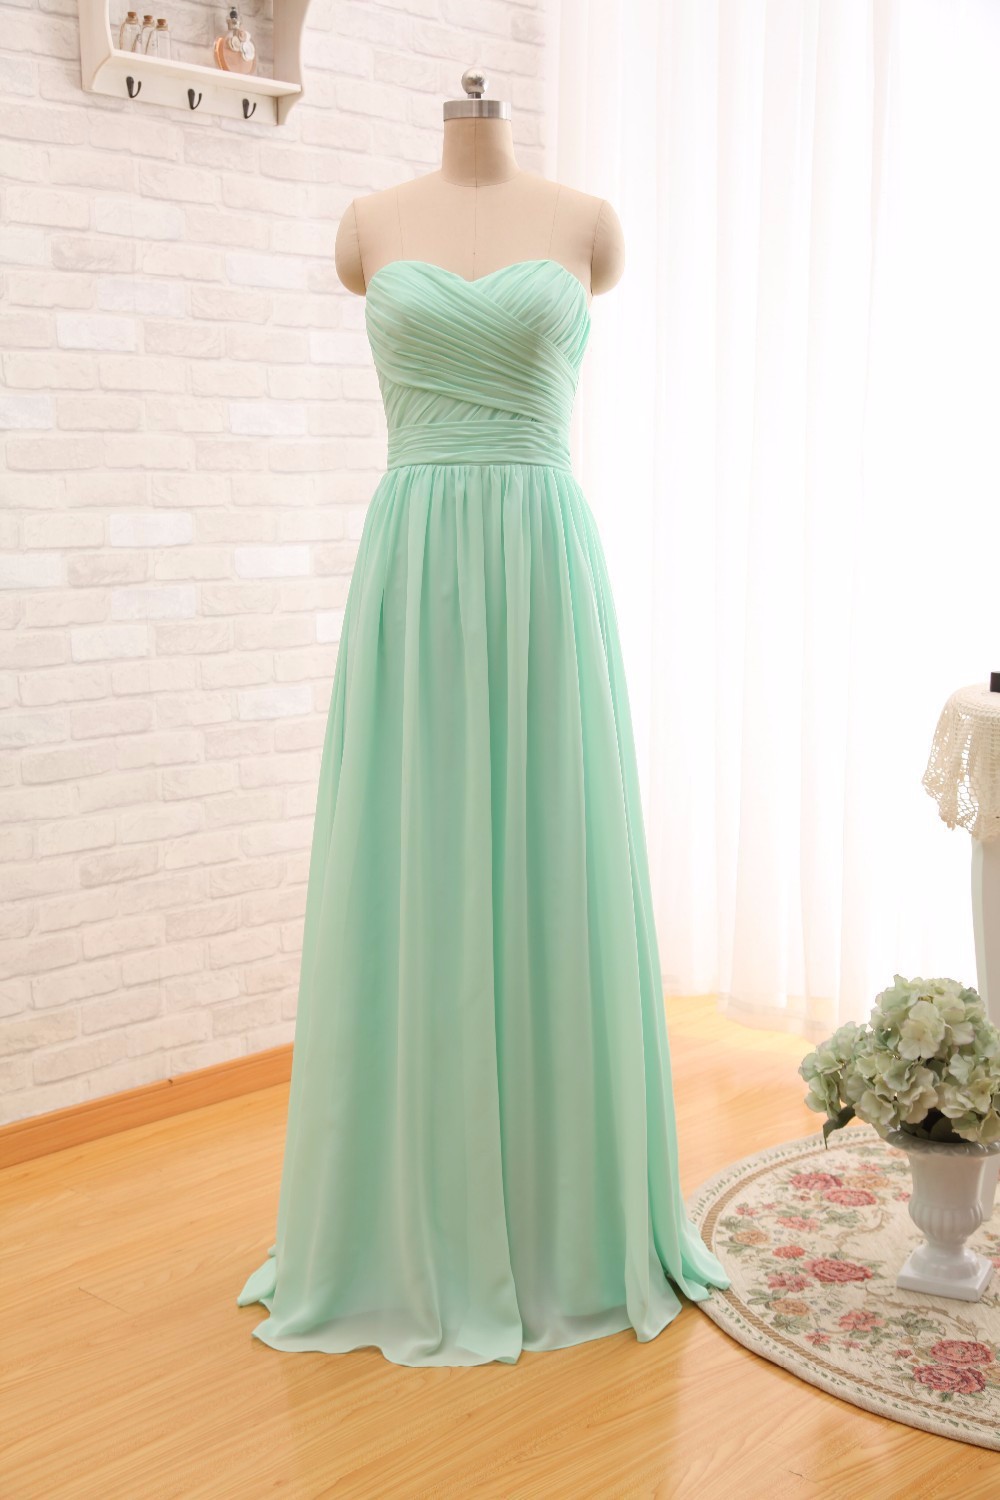 2017 Long Mint Green Bridesmaid Dresses Sweetheart Floor Length Chiffon A-line Wedding Party Dress Prom Gowns